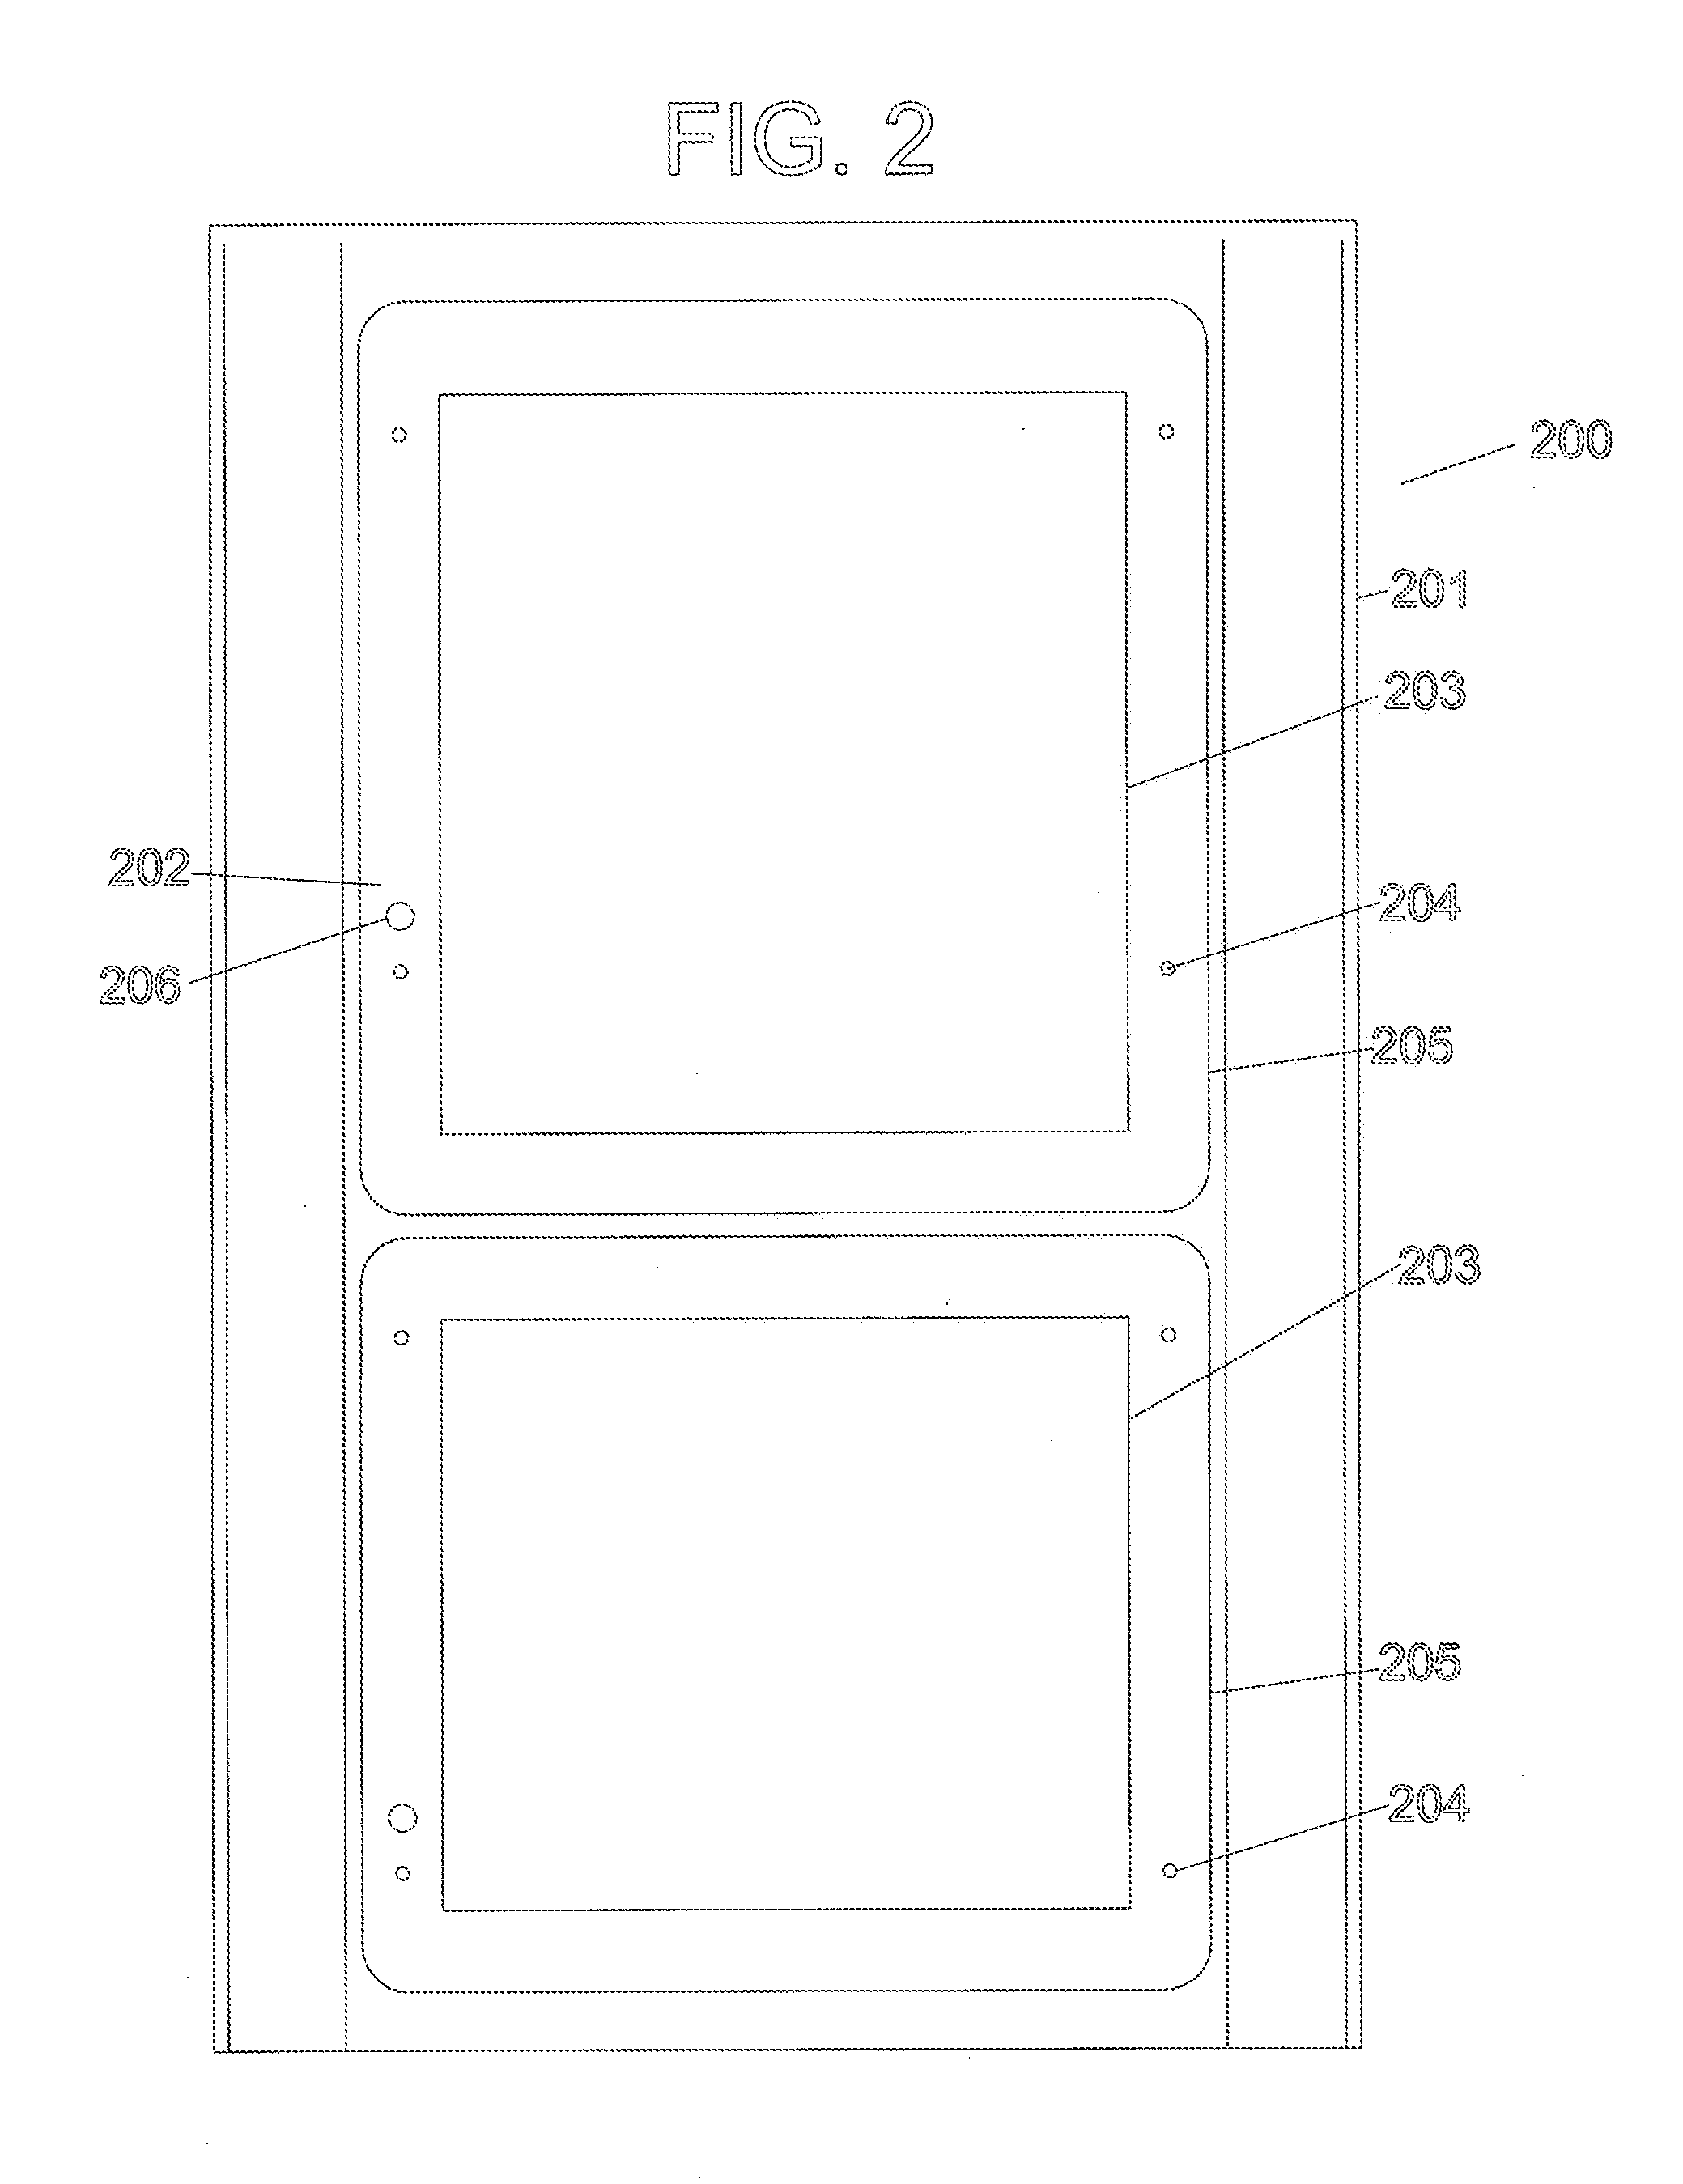 Pop up electrical apparatus with safety system